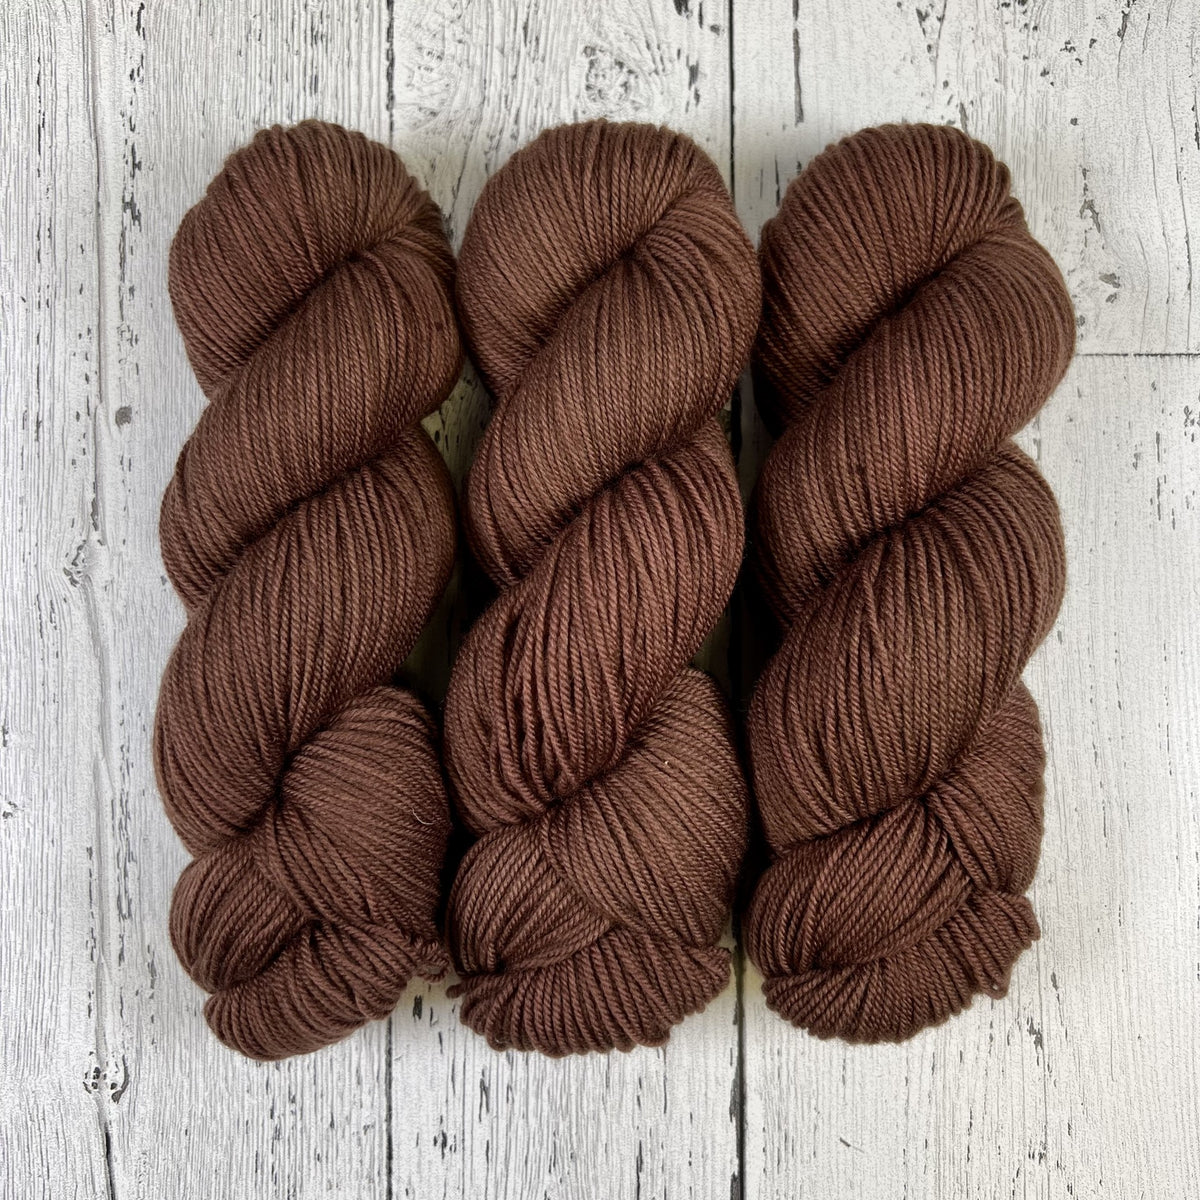 Chocolate Lab - Nettle Soft DK - Dyed Stock